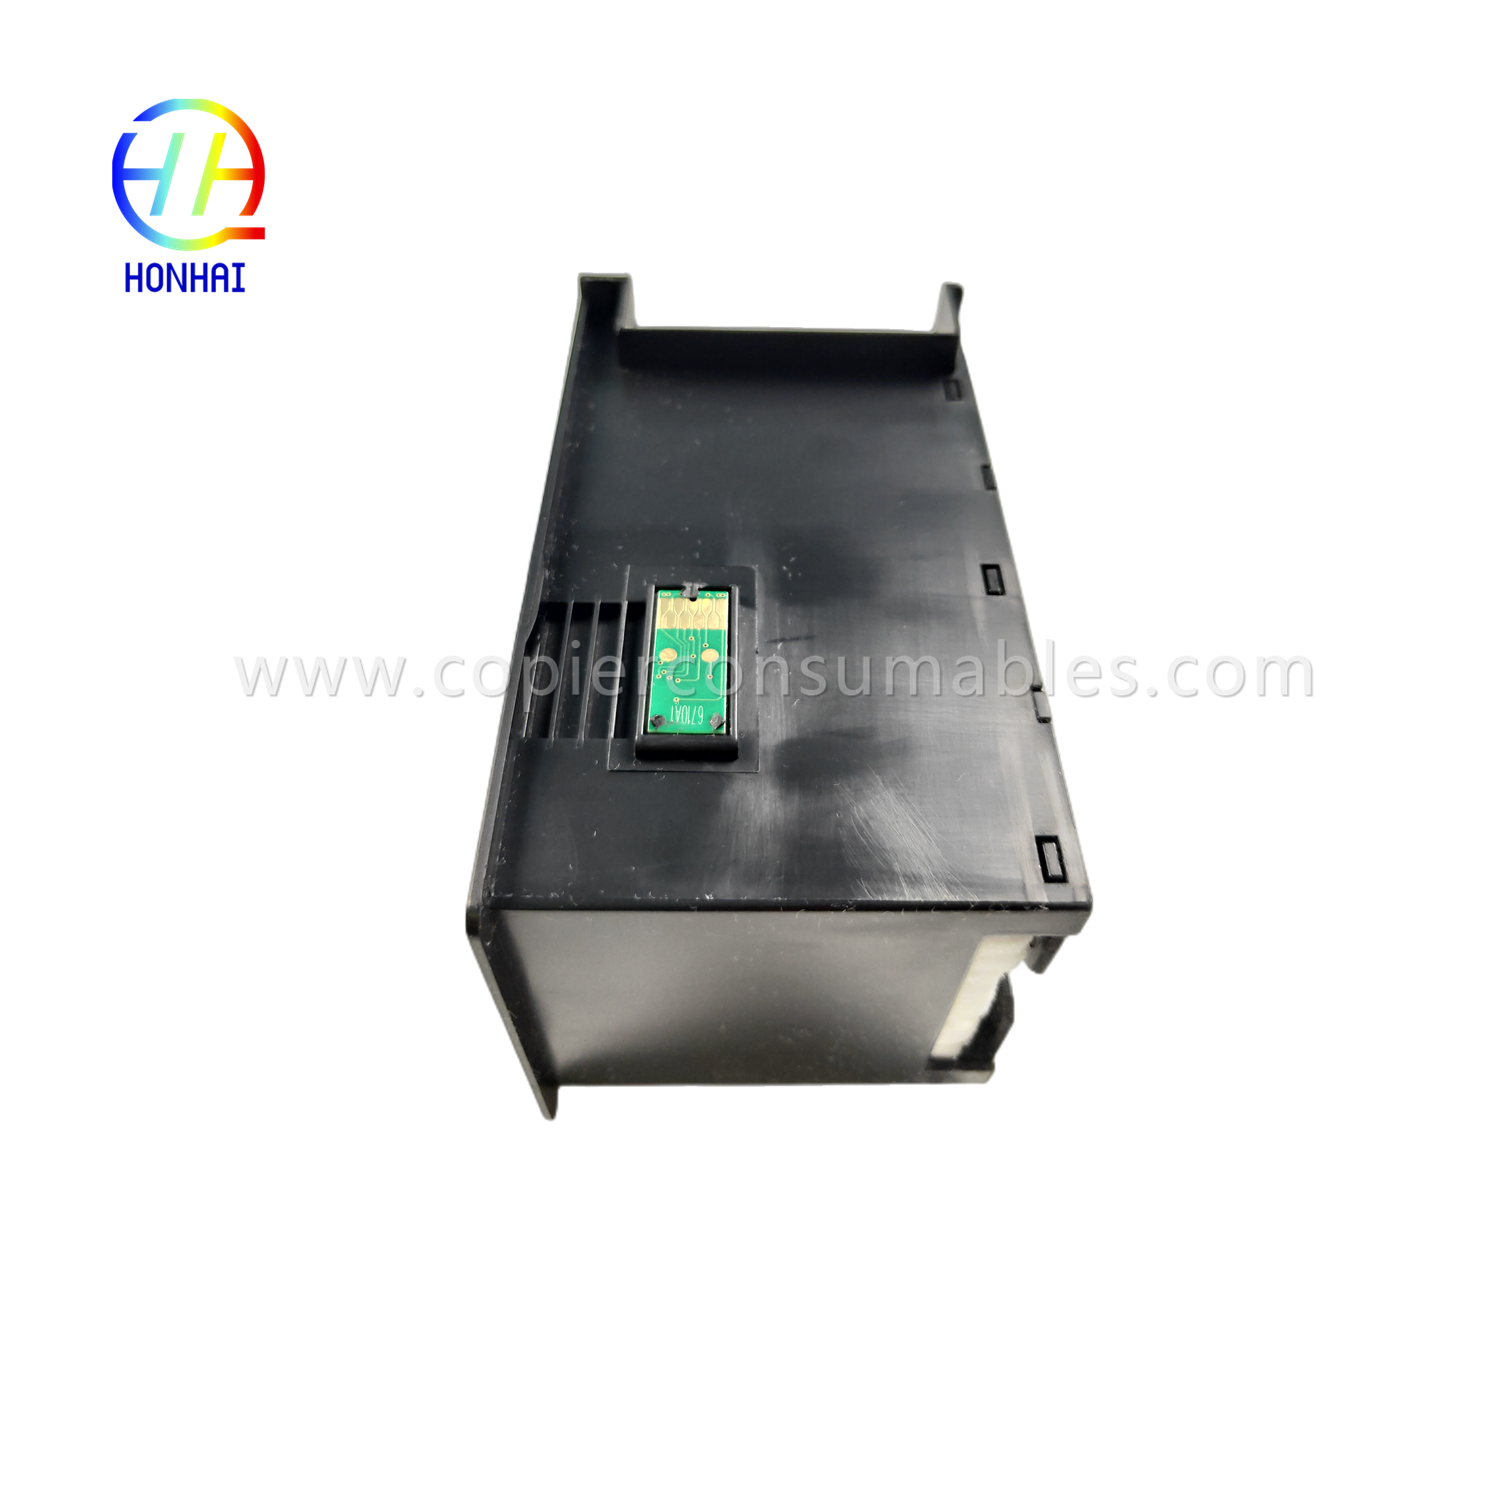 https://c585.goodao.net/waste-box-for-epson-workforce-wp-4535-4540-4545-4590-4595-m4015-m4095-m4525-m4595-t6710-product/